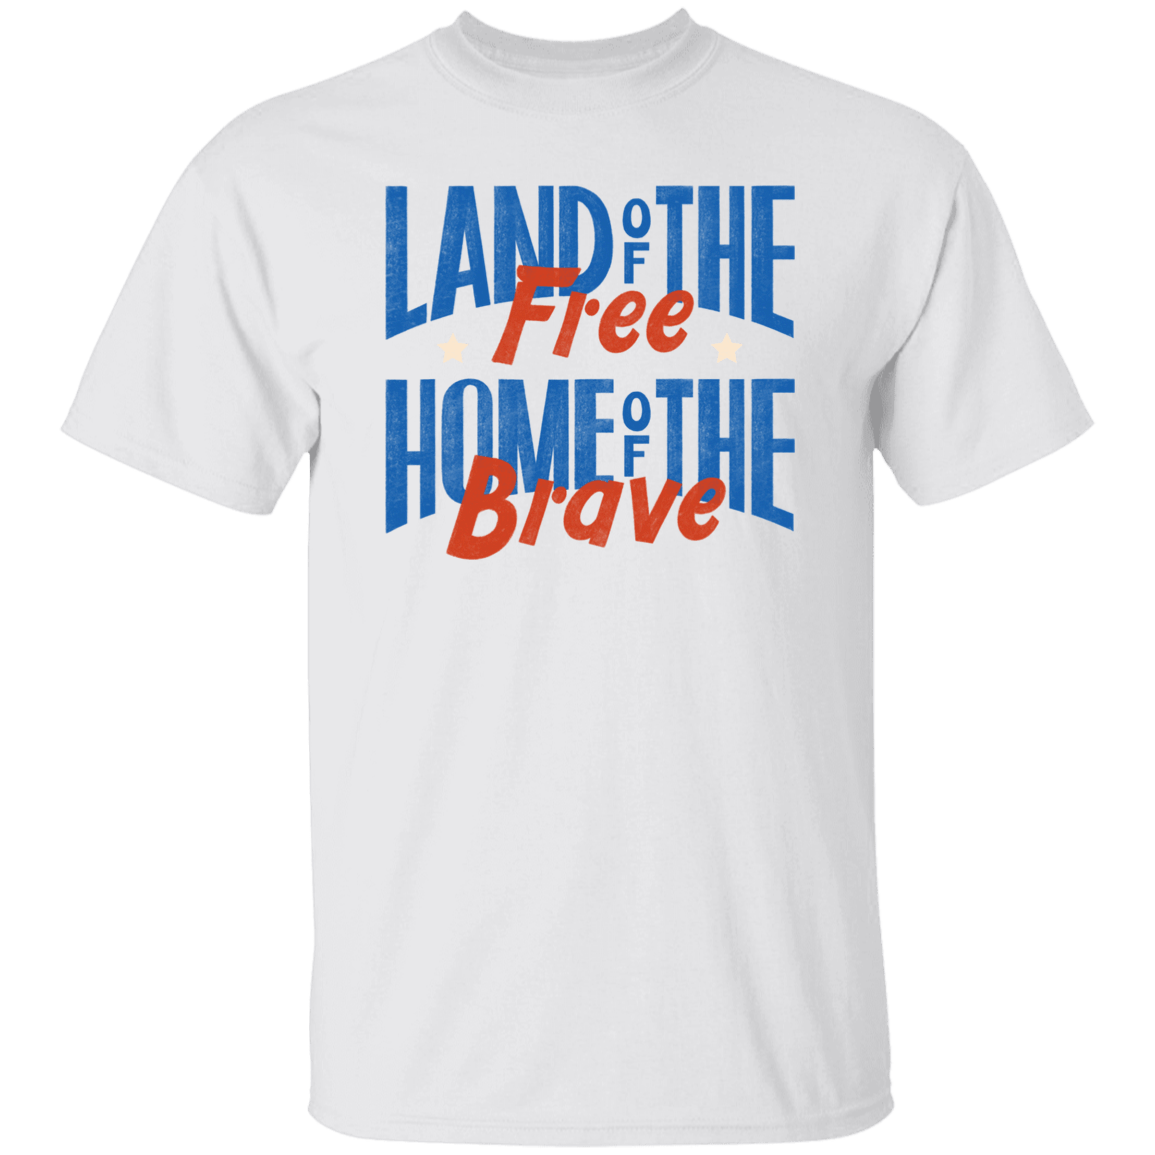 Land of the Free T-Shirt